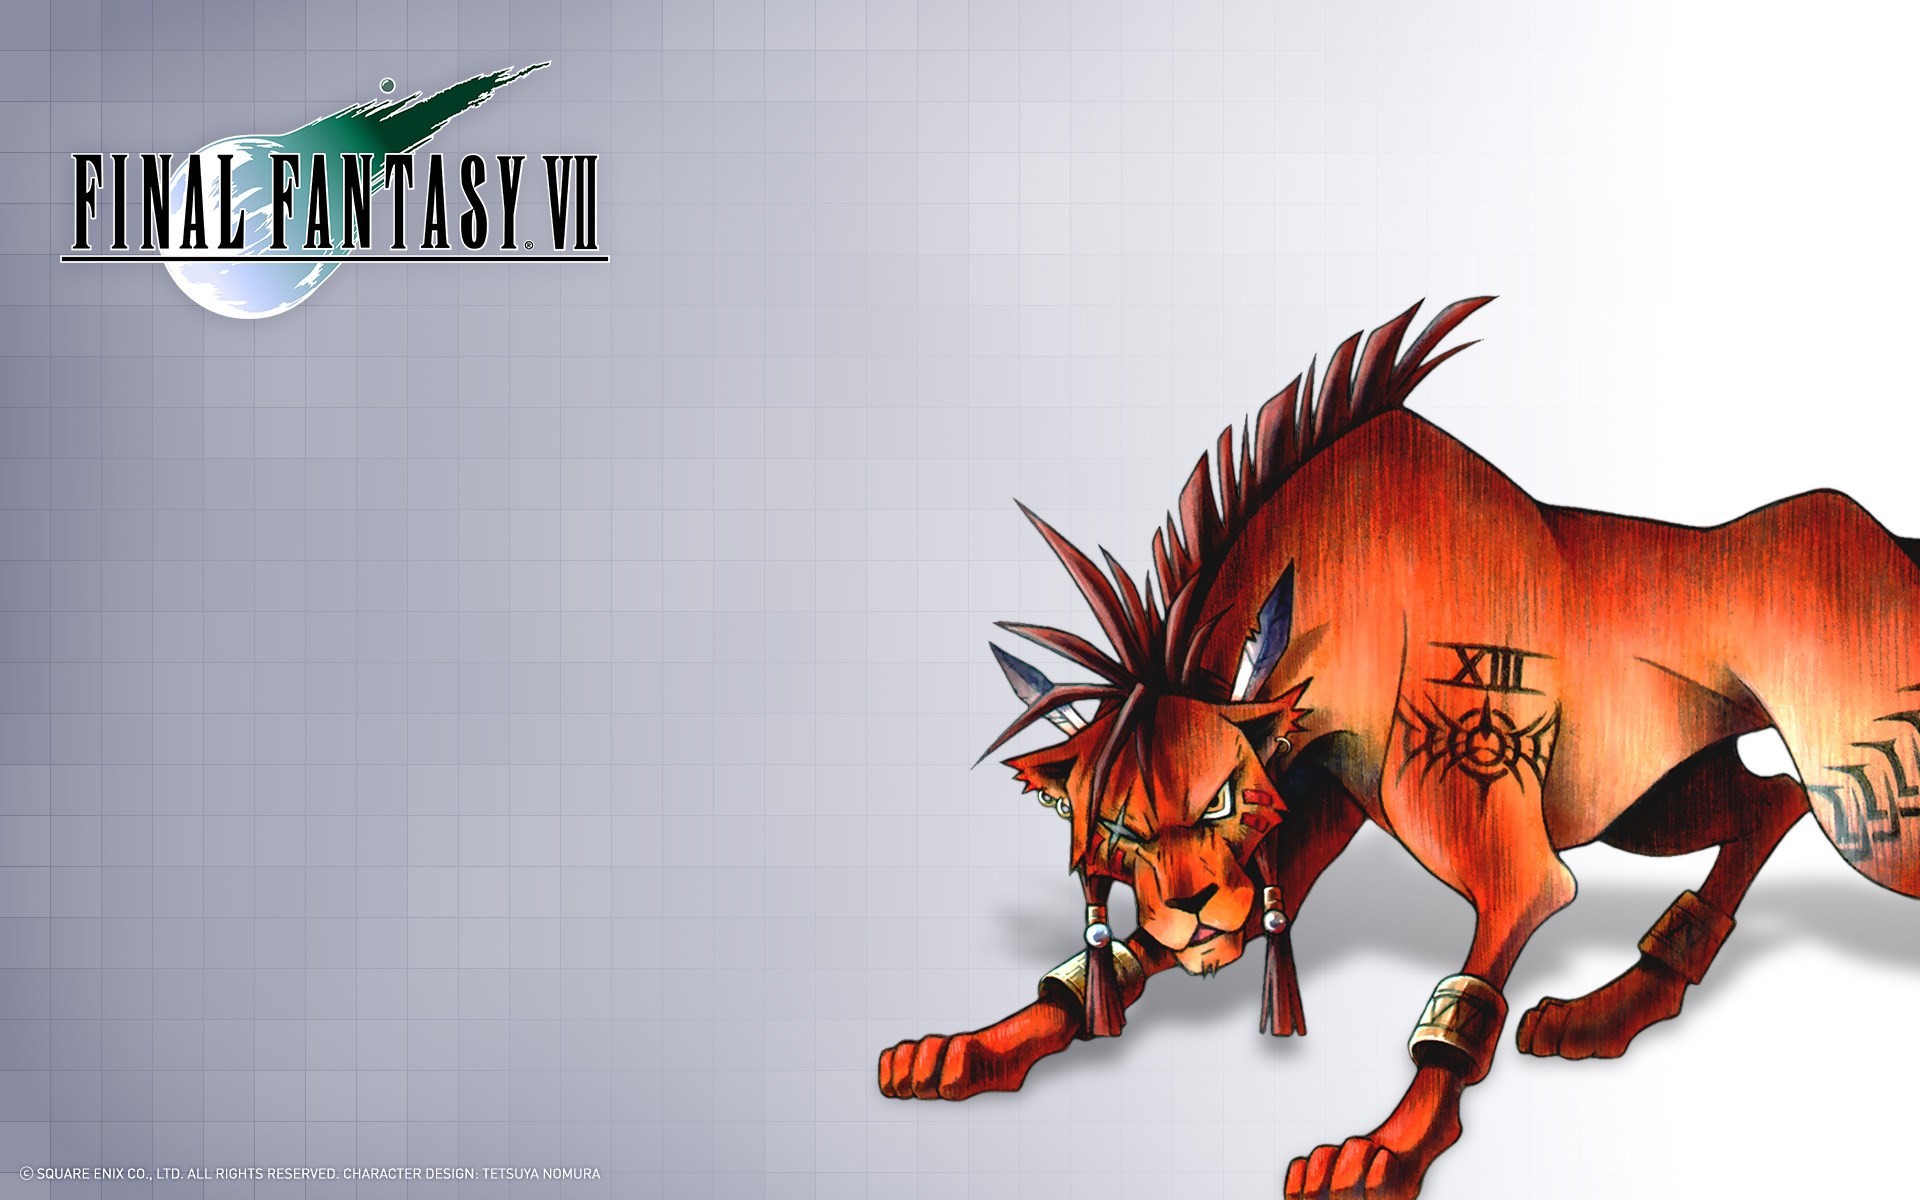 1920x1200 final fantasy vii pictures to download, Flemming Little 2017-03-14